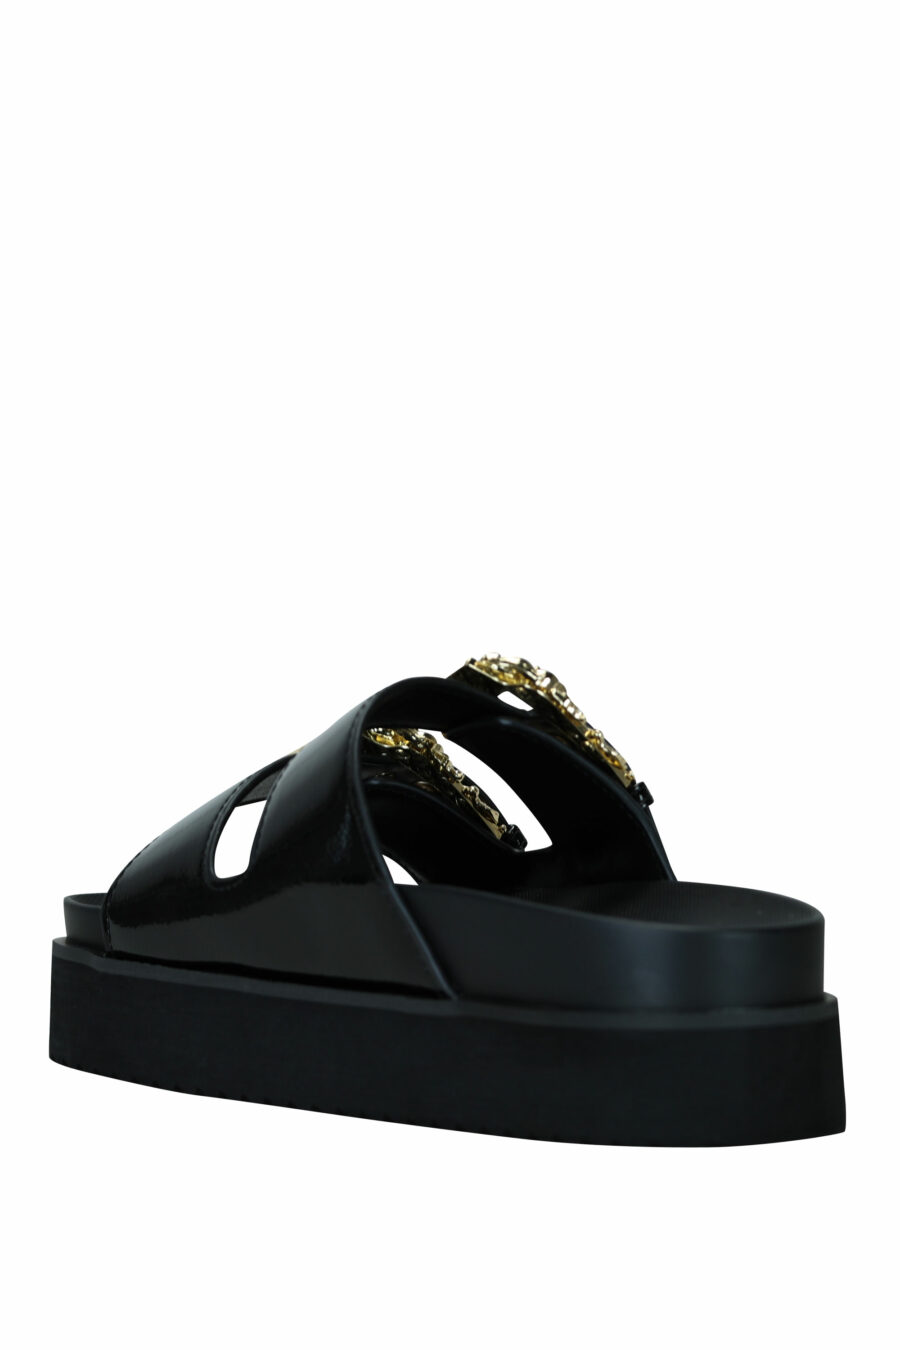 Black sandals with gold baroque double buckle - 8052019607253 4